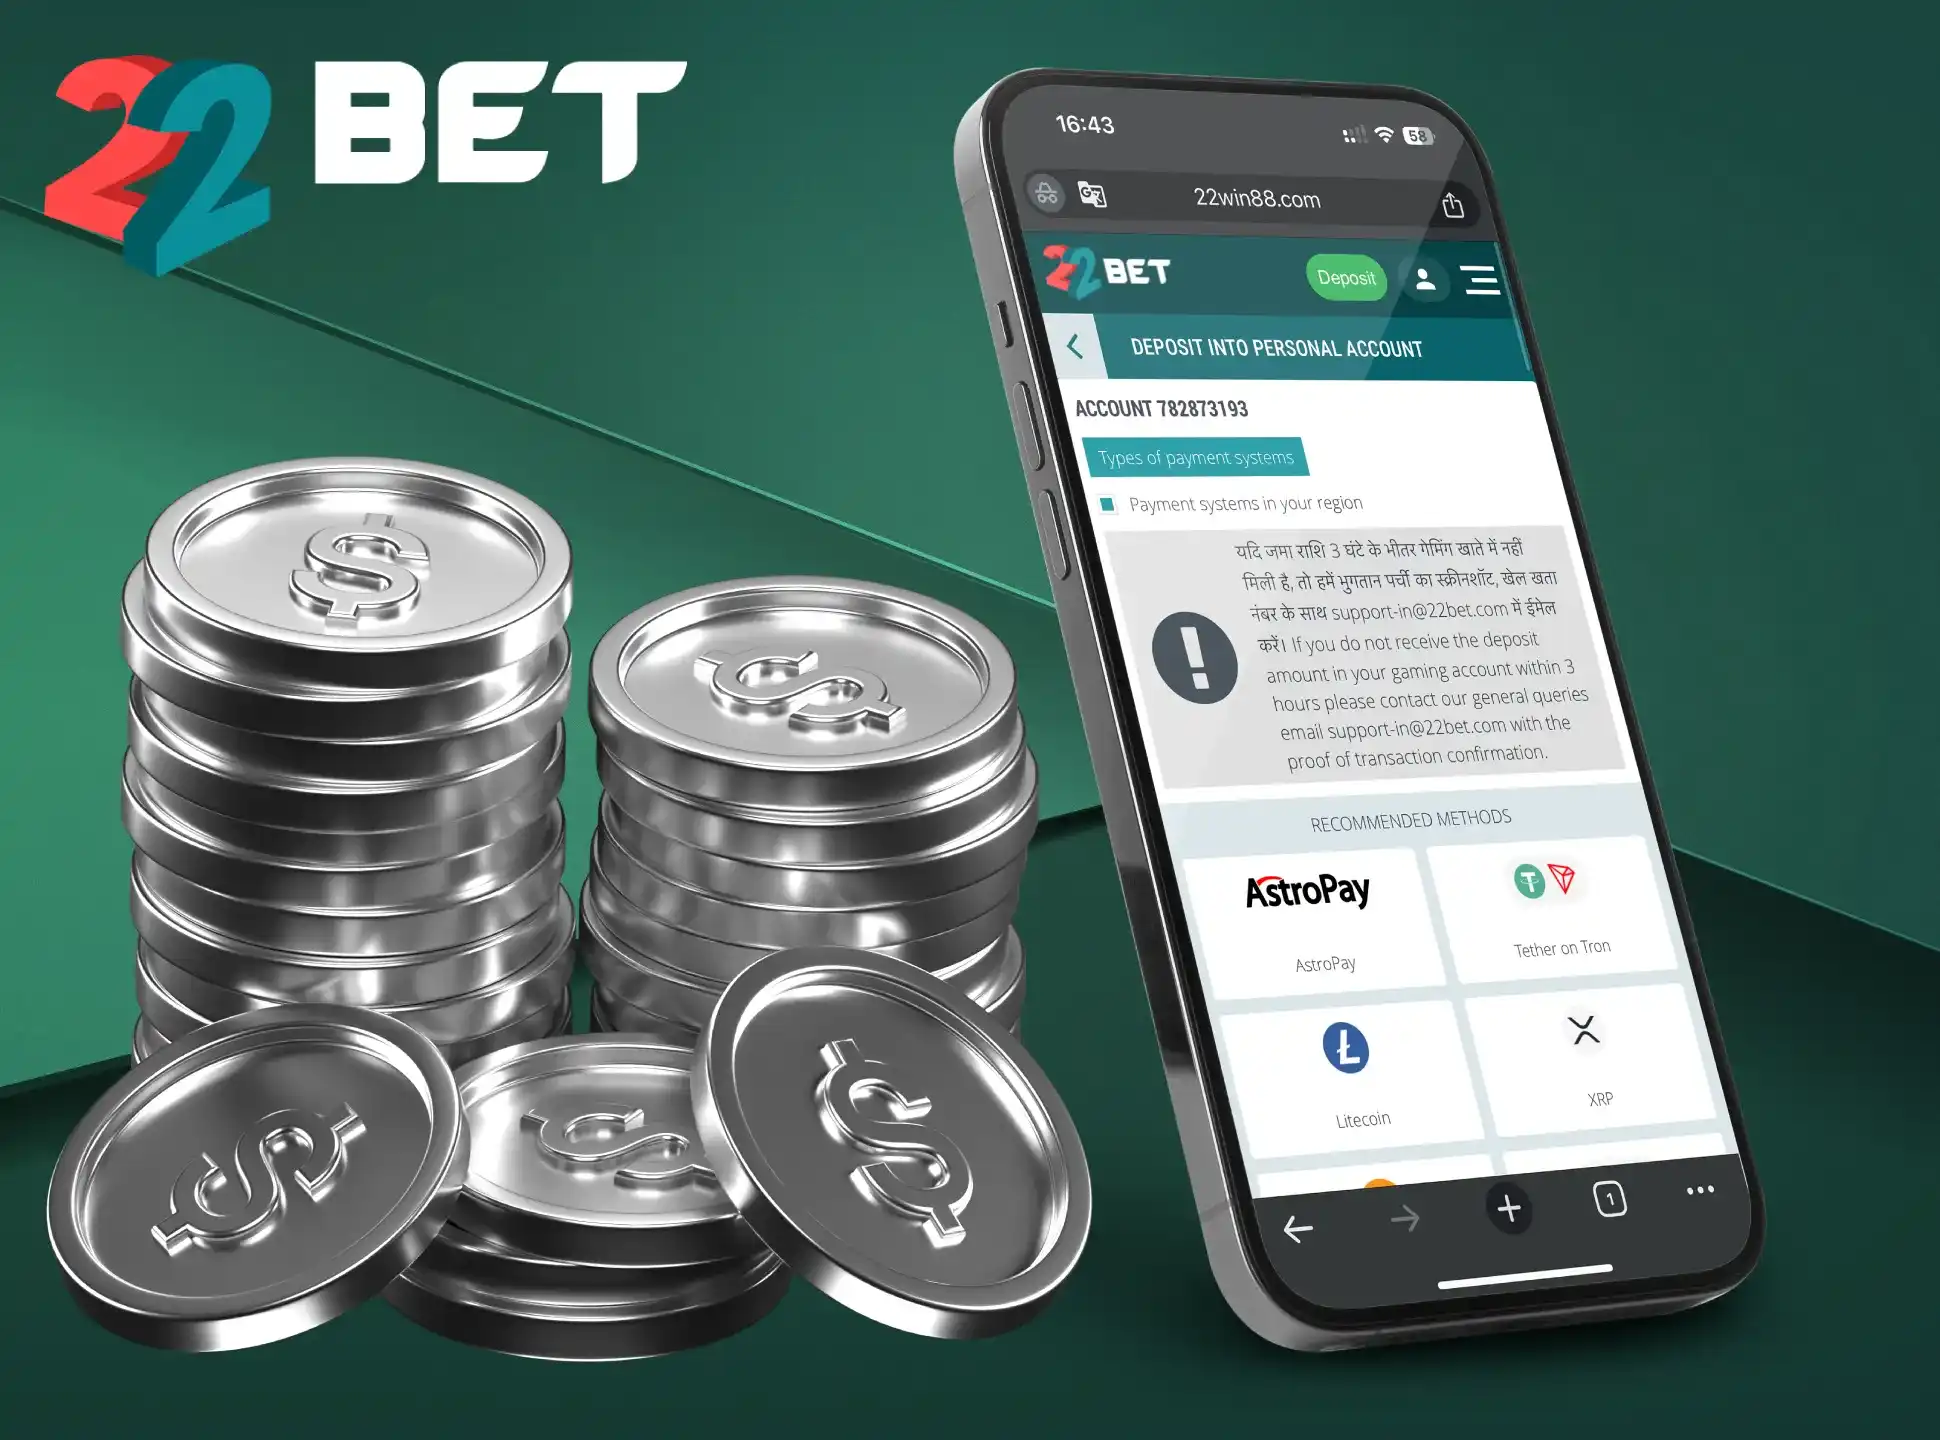 Step-by-step instructions will tell you how to make a deposit in the 22Bet app.